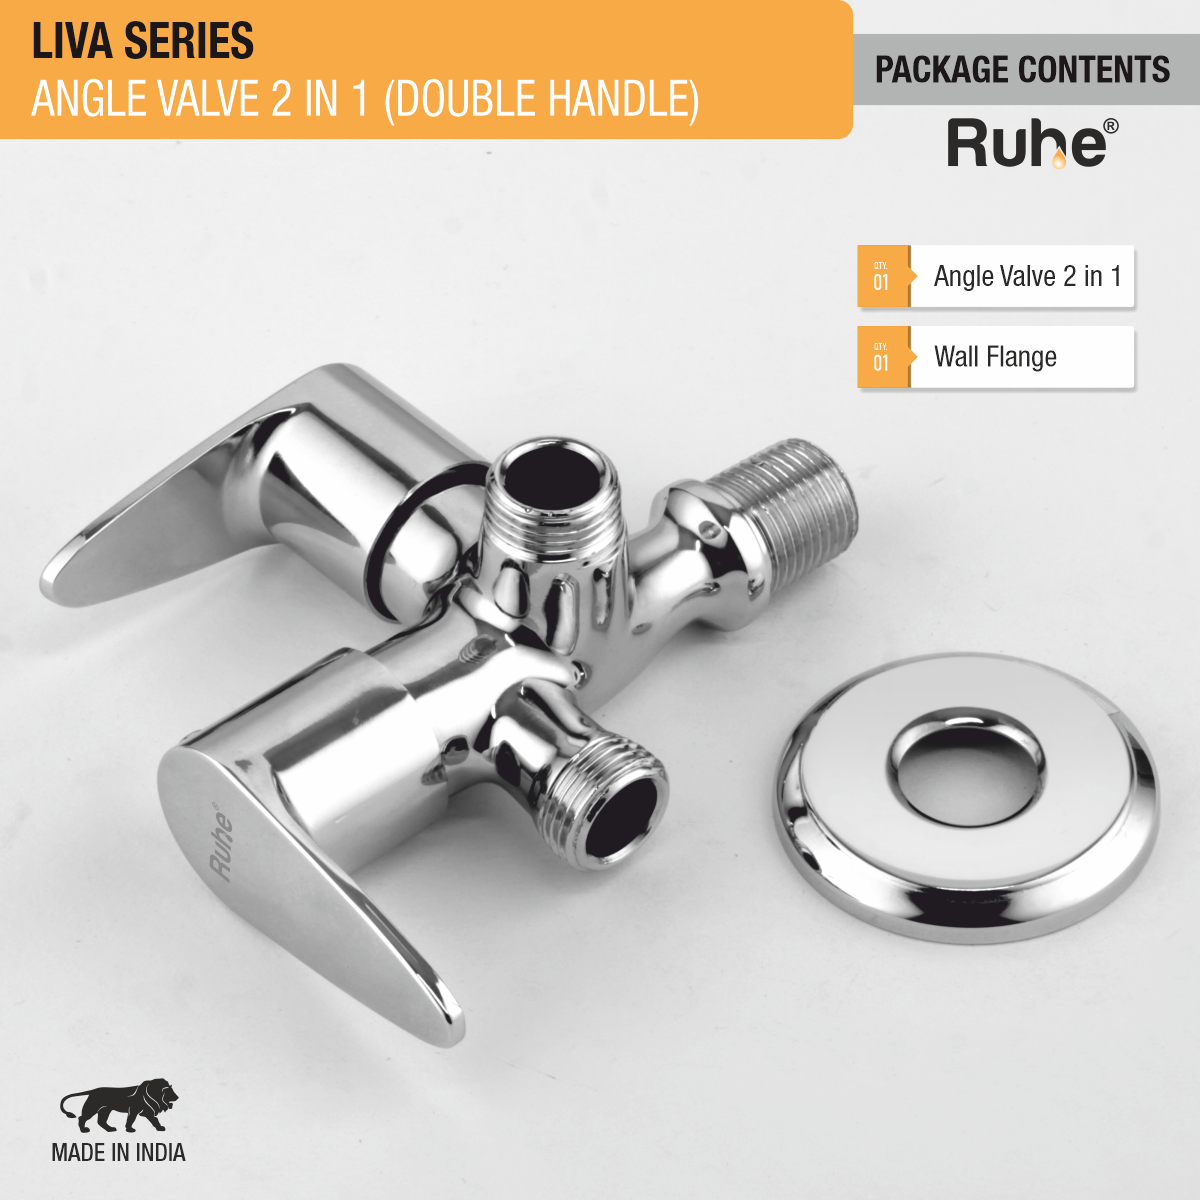 Liva Two Way Angle Valve Brass Faucet (Double Handle) package content